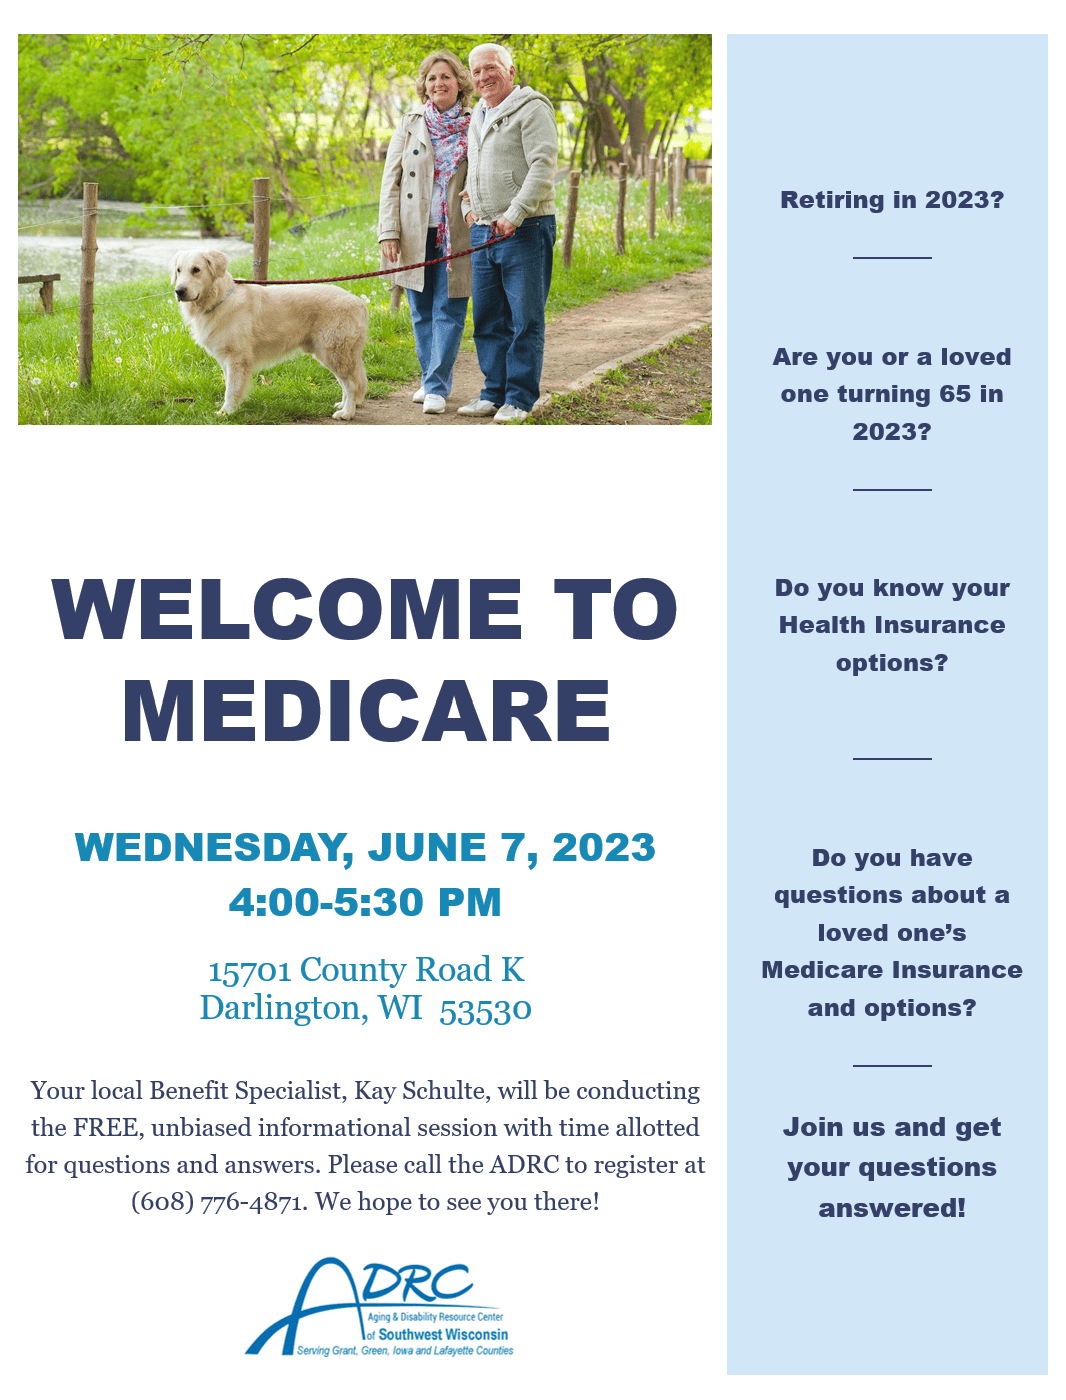 Welcome to Medicare @ ADRC - Lafayette County